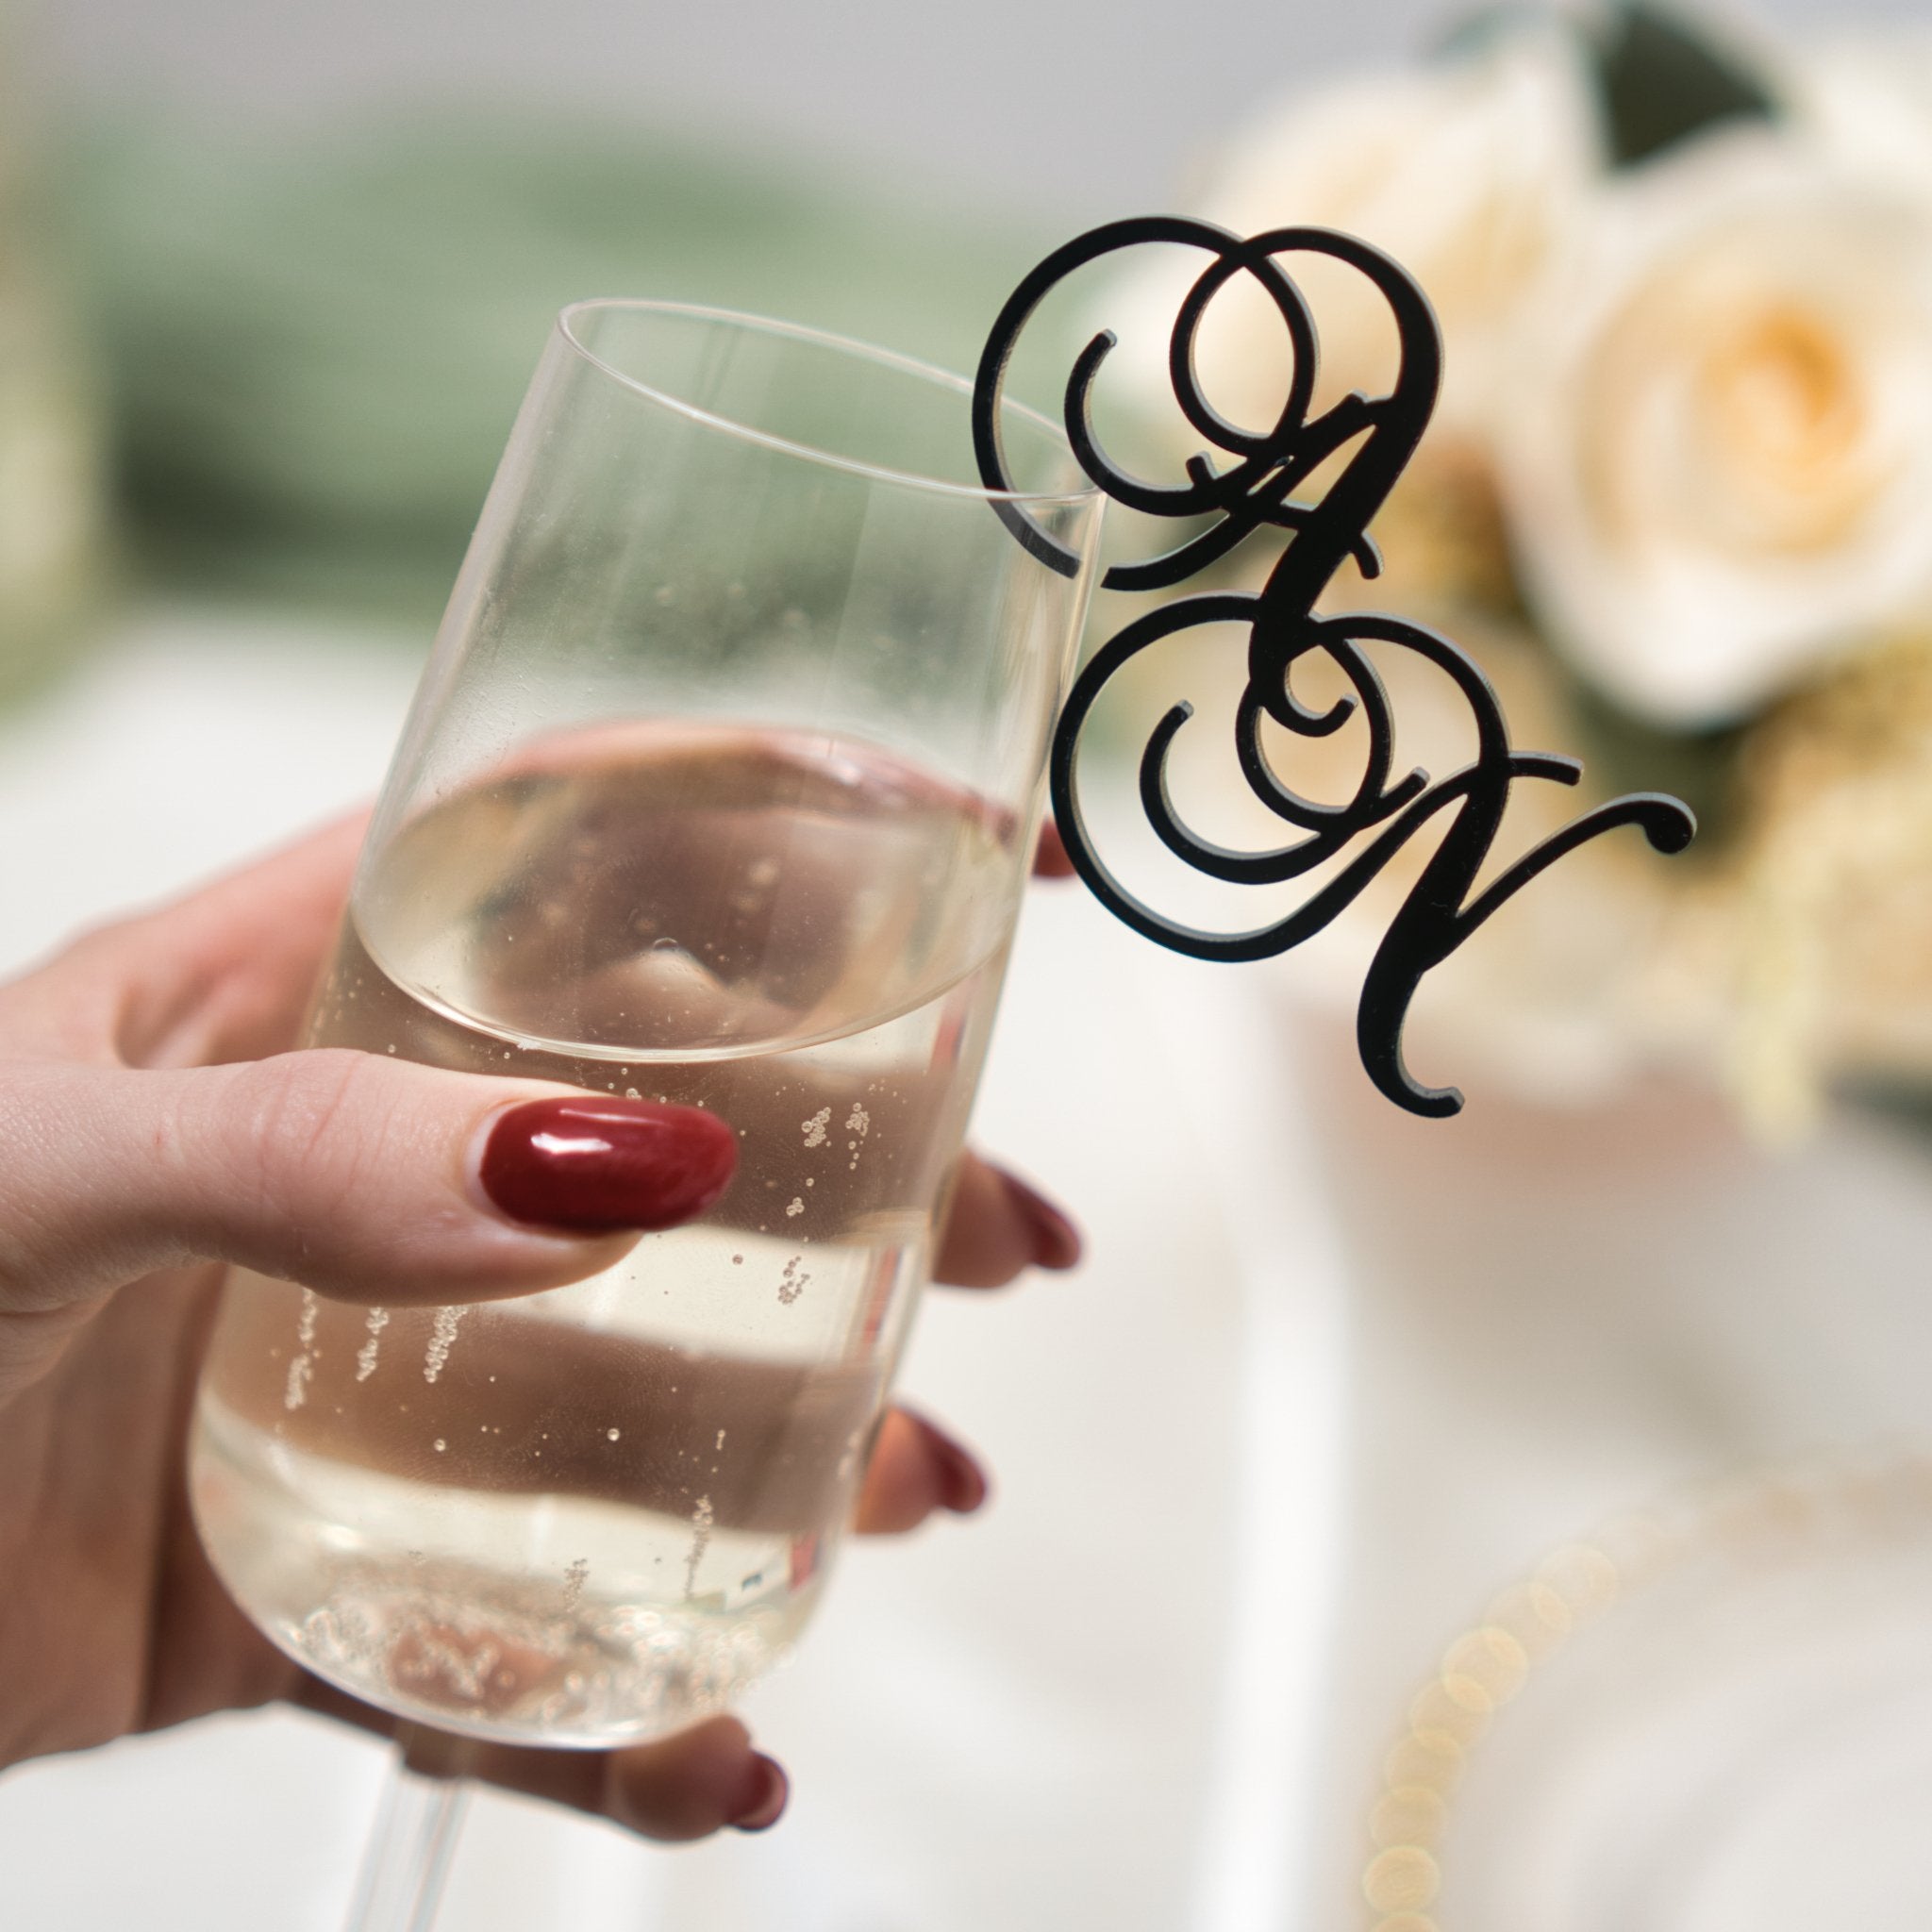 Why use drink charms at a wedding -  By Inketch